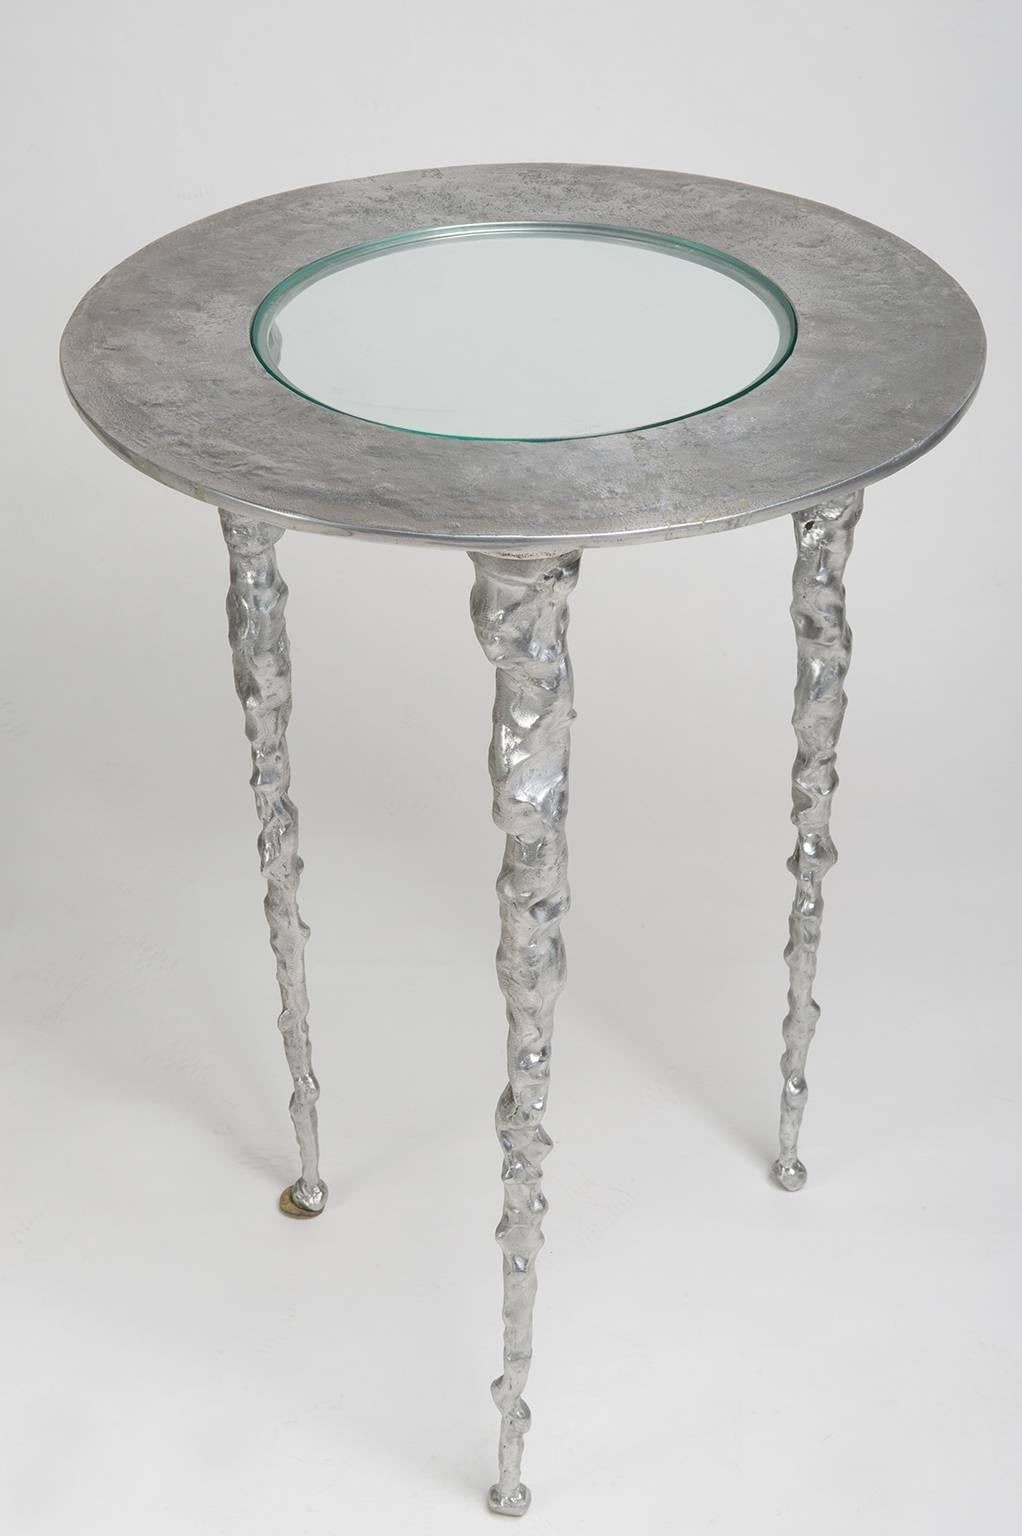 O/4690. Michael Aram little table in silvered bronze.